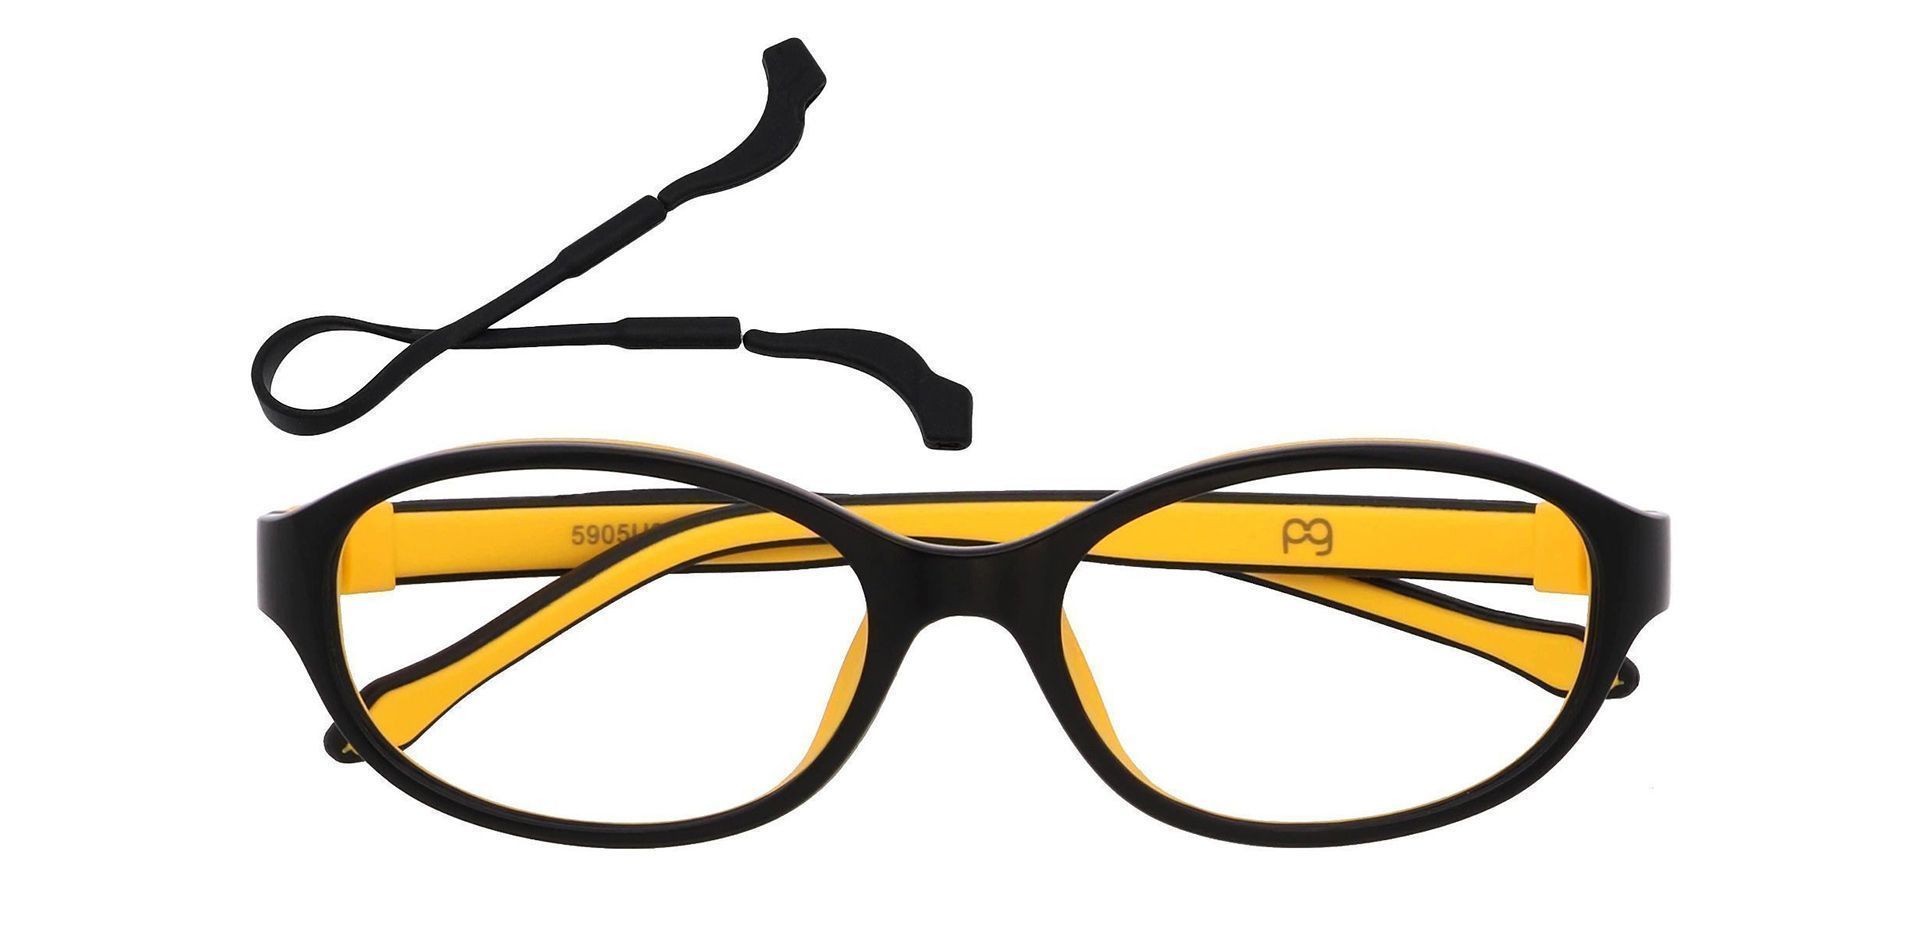 Stone Oval Reading Glasses - The Frame Is Black And Yellow